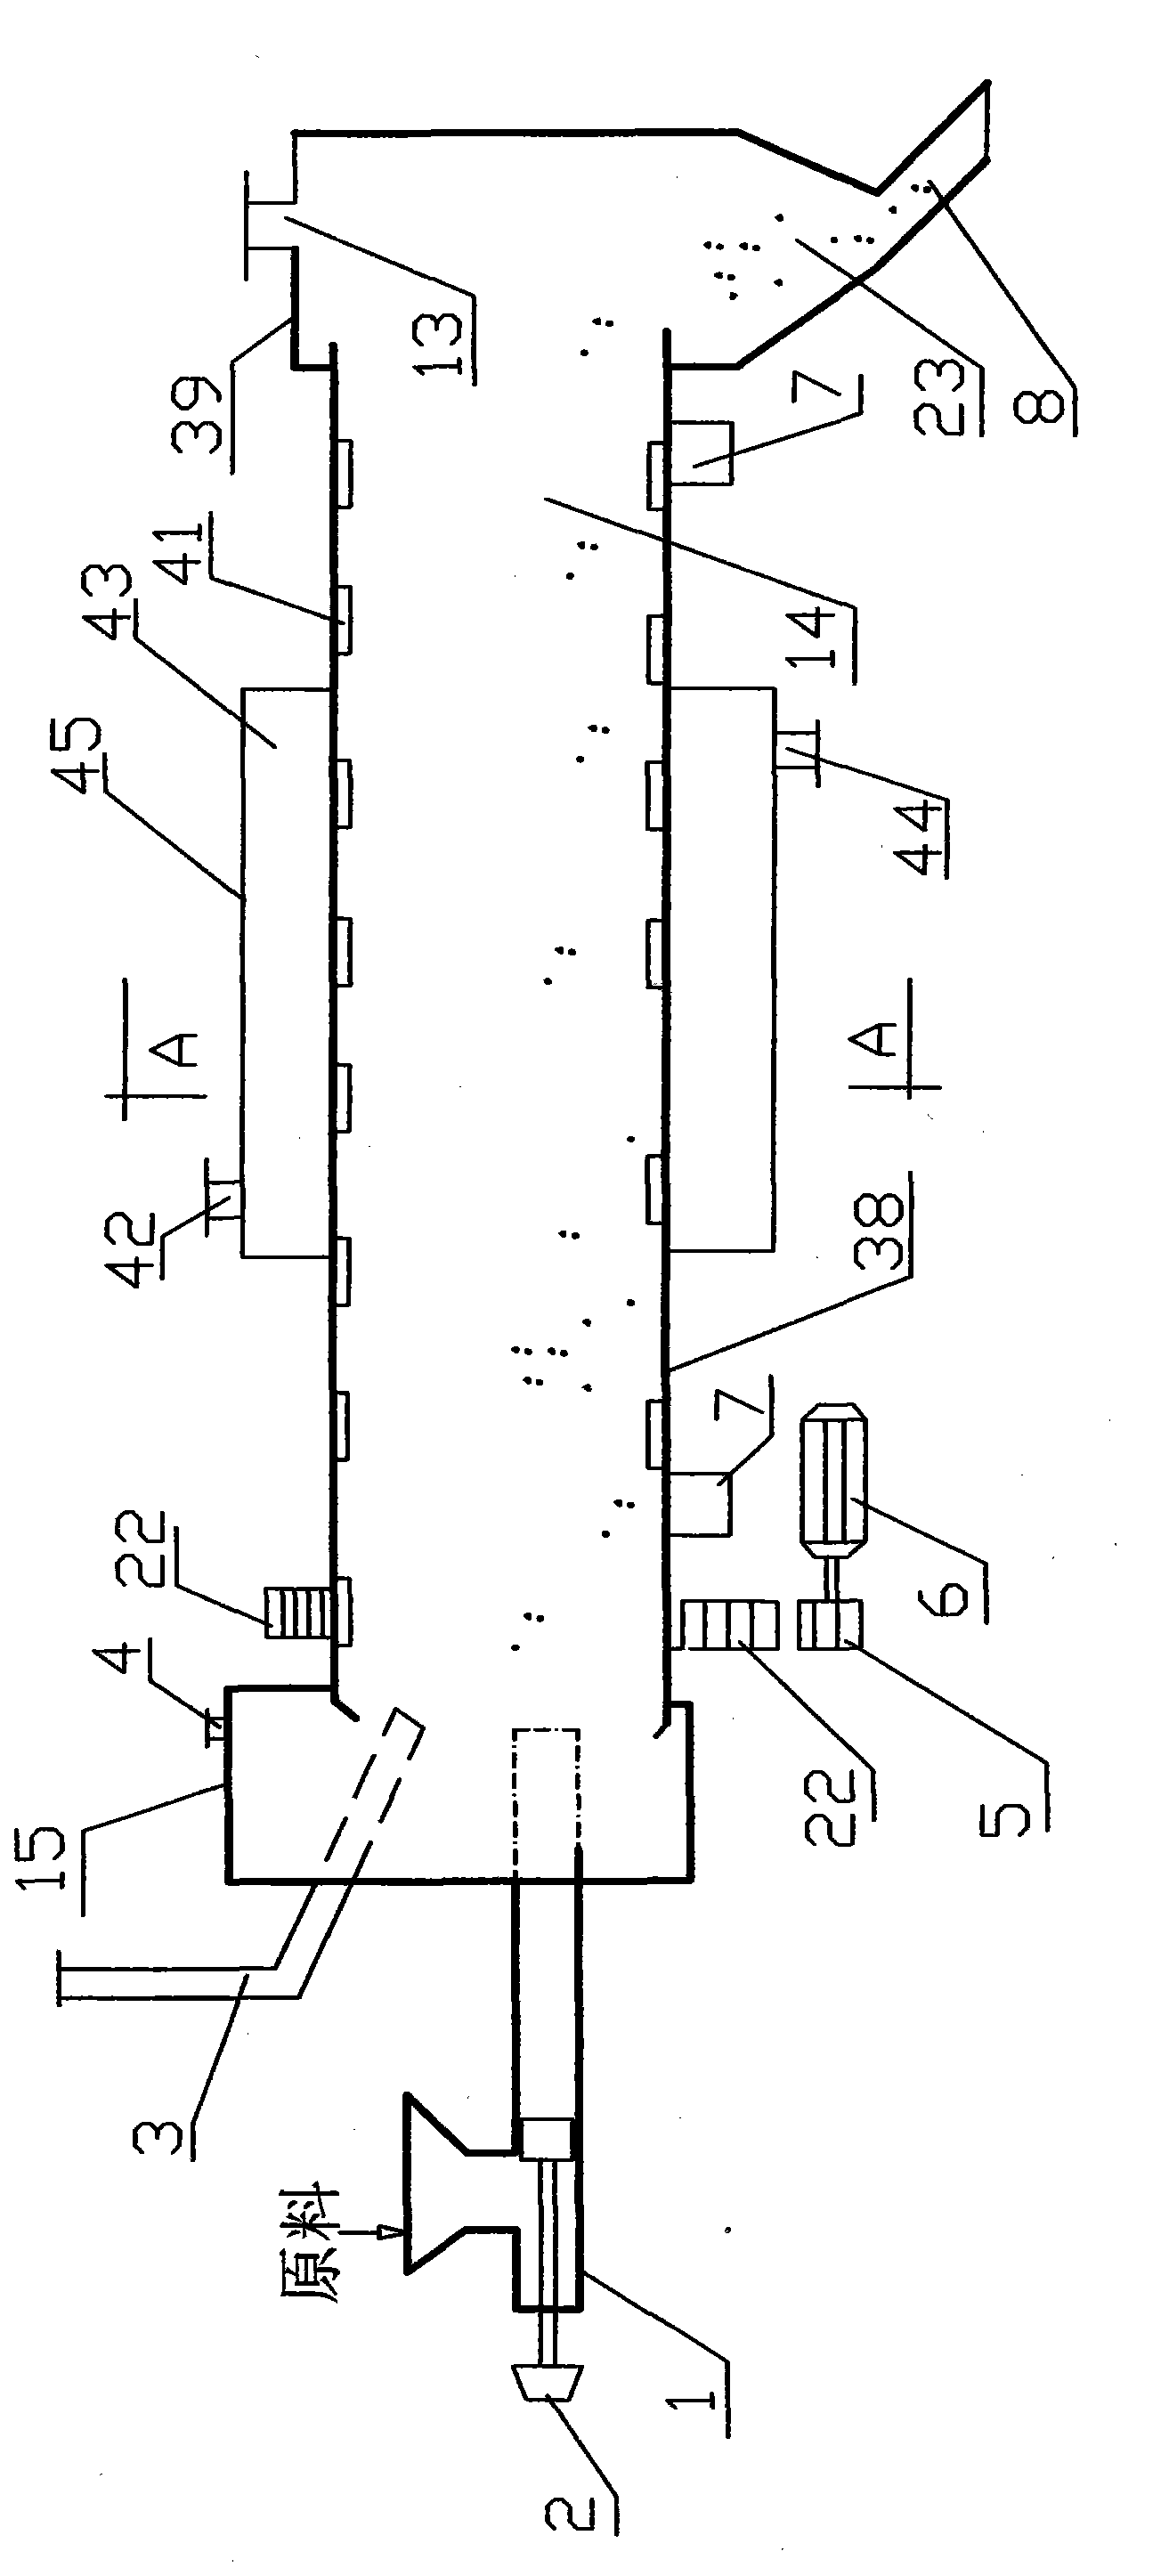 Device for production of fuel oil and fuel gas and/or flue gas power generation through household garbage